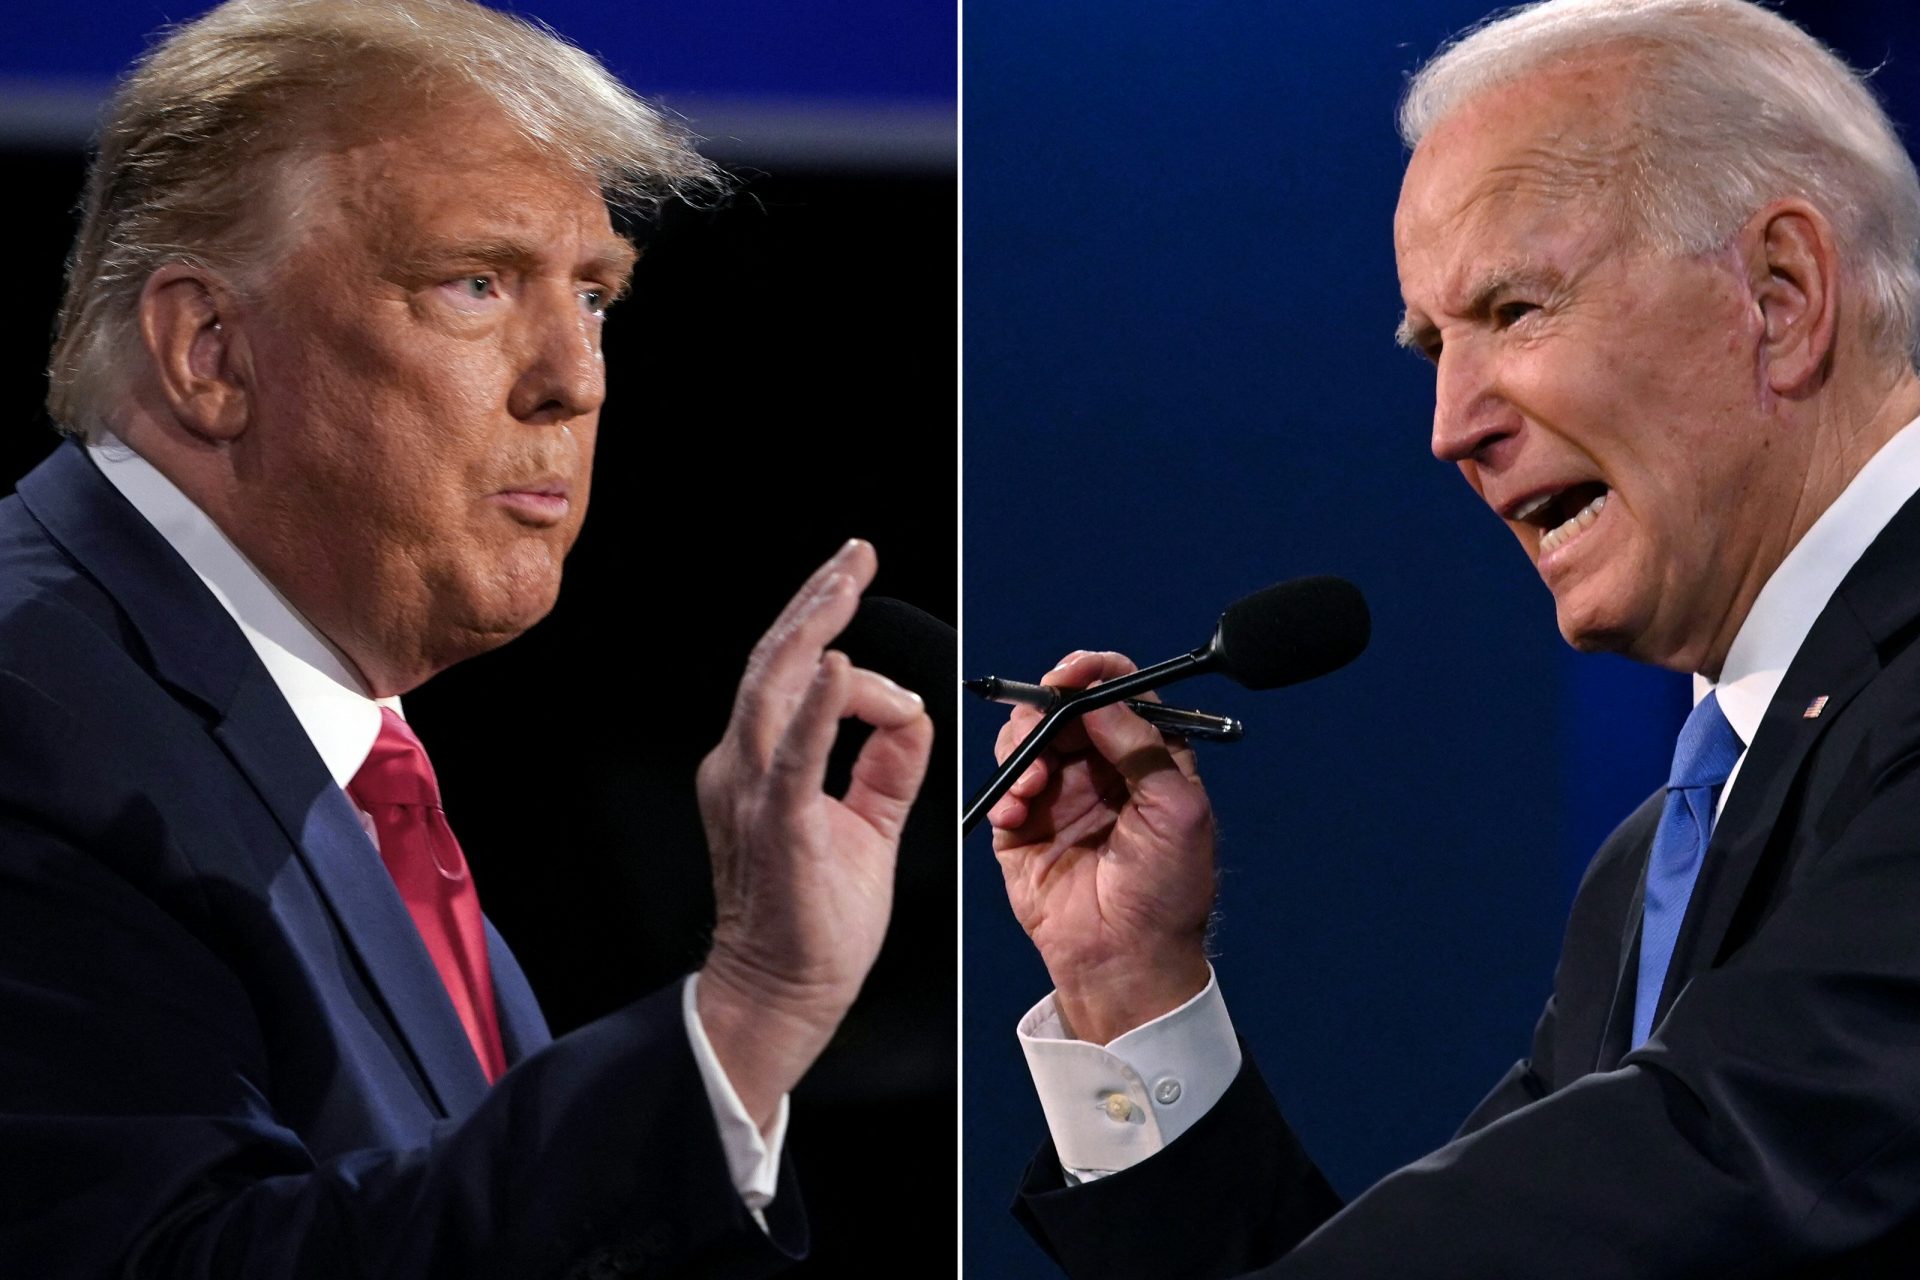 Biden backers don’t want Trump to win